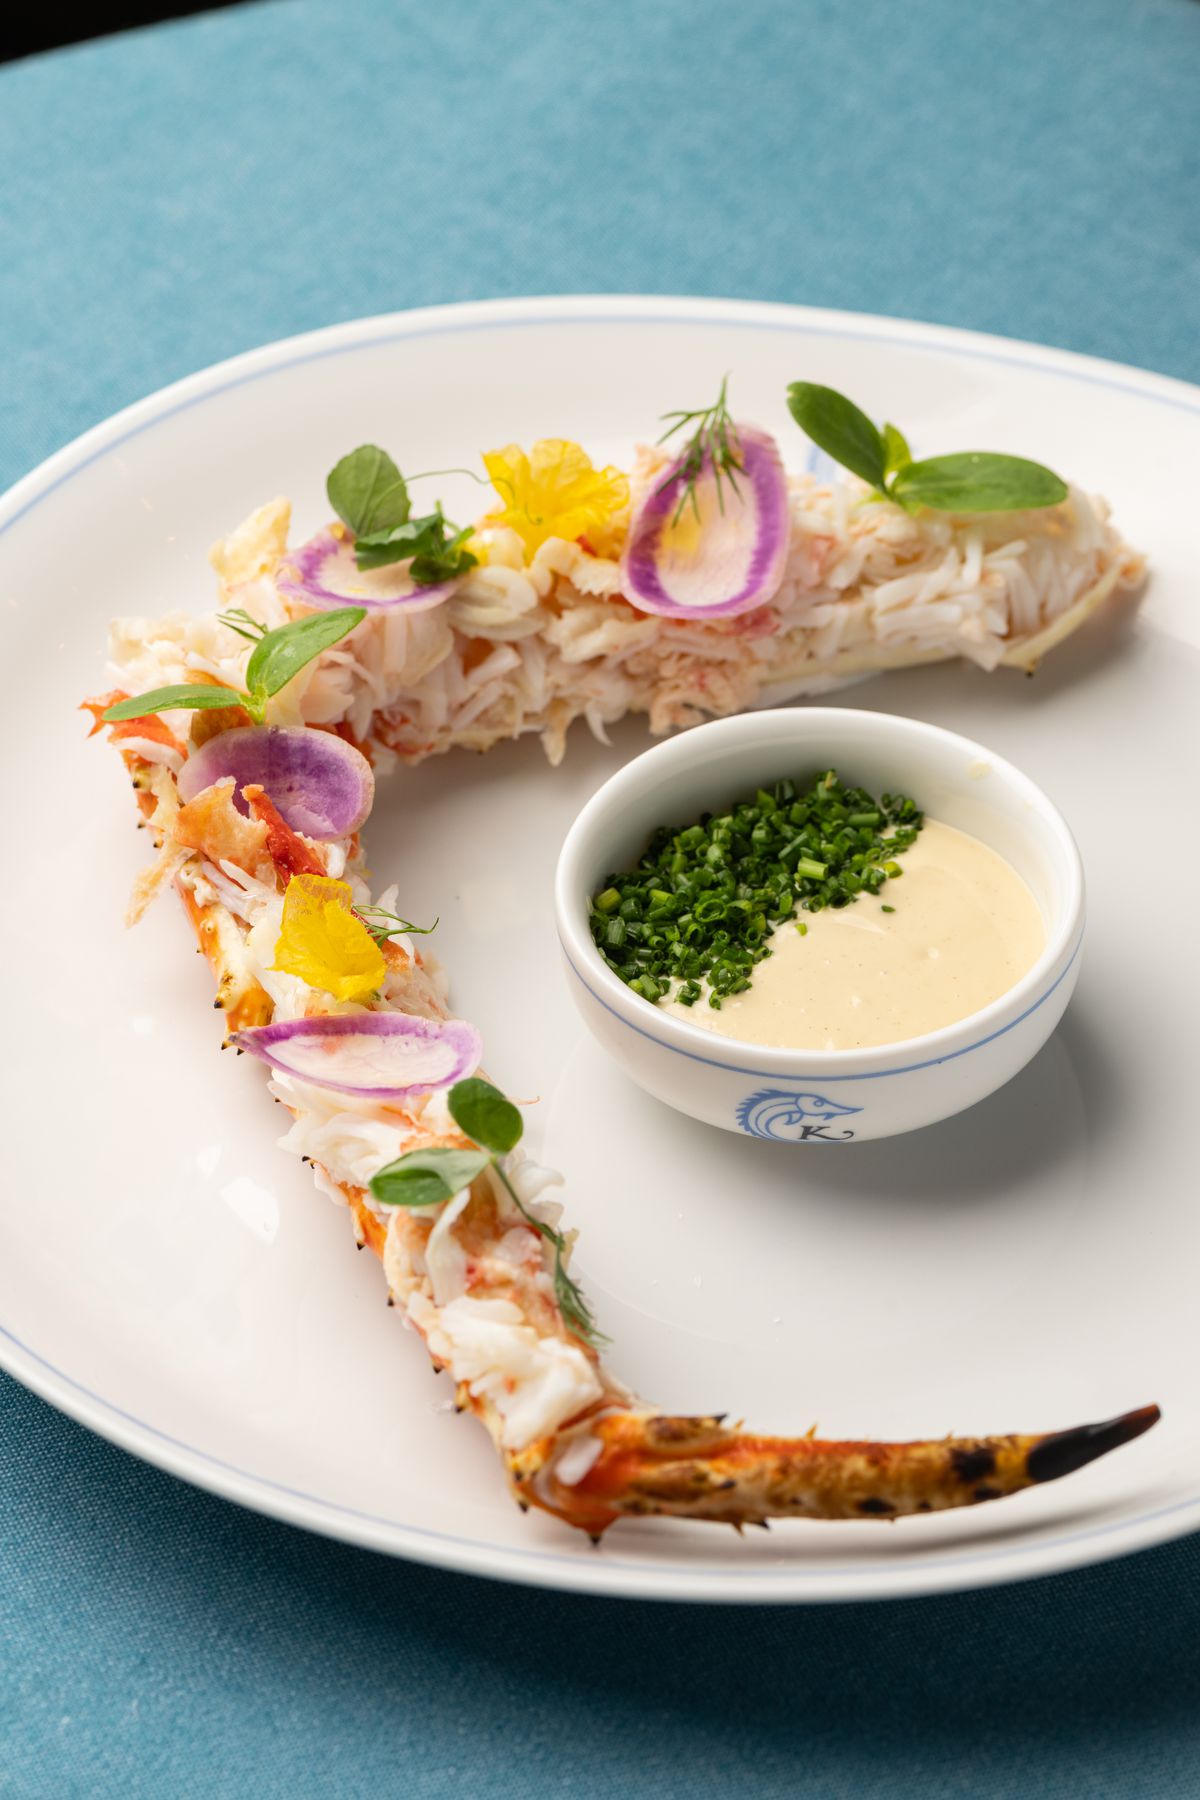 A king crab leg with edible flowers and a side of dijon aioli at Caviar Kaspia.